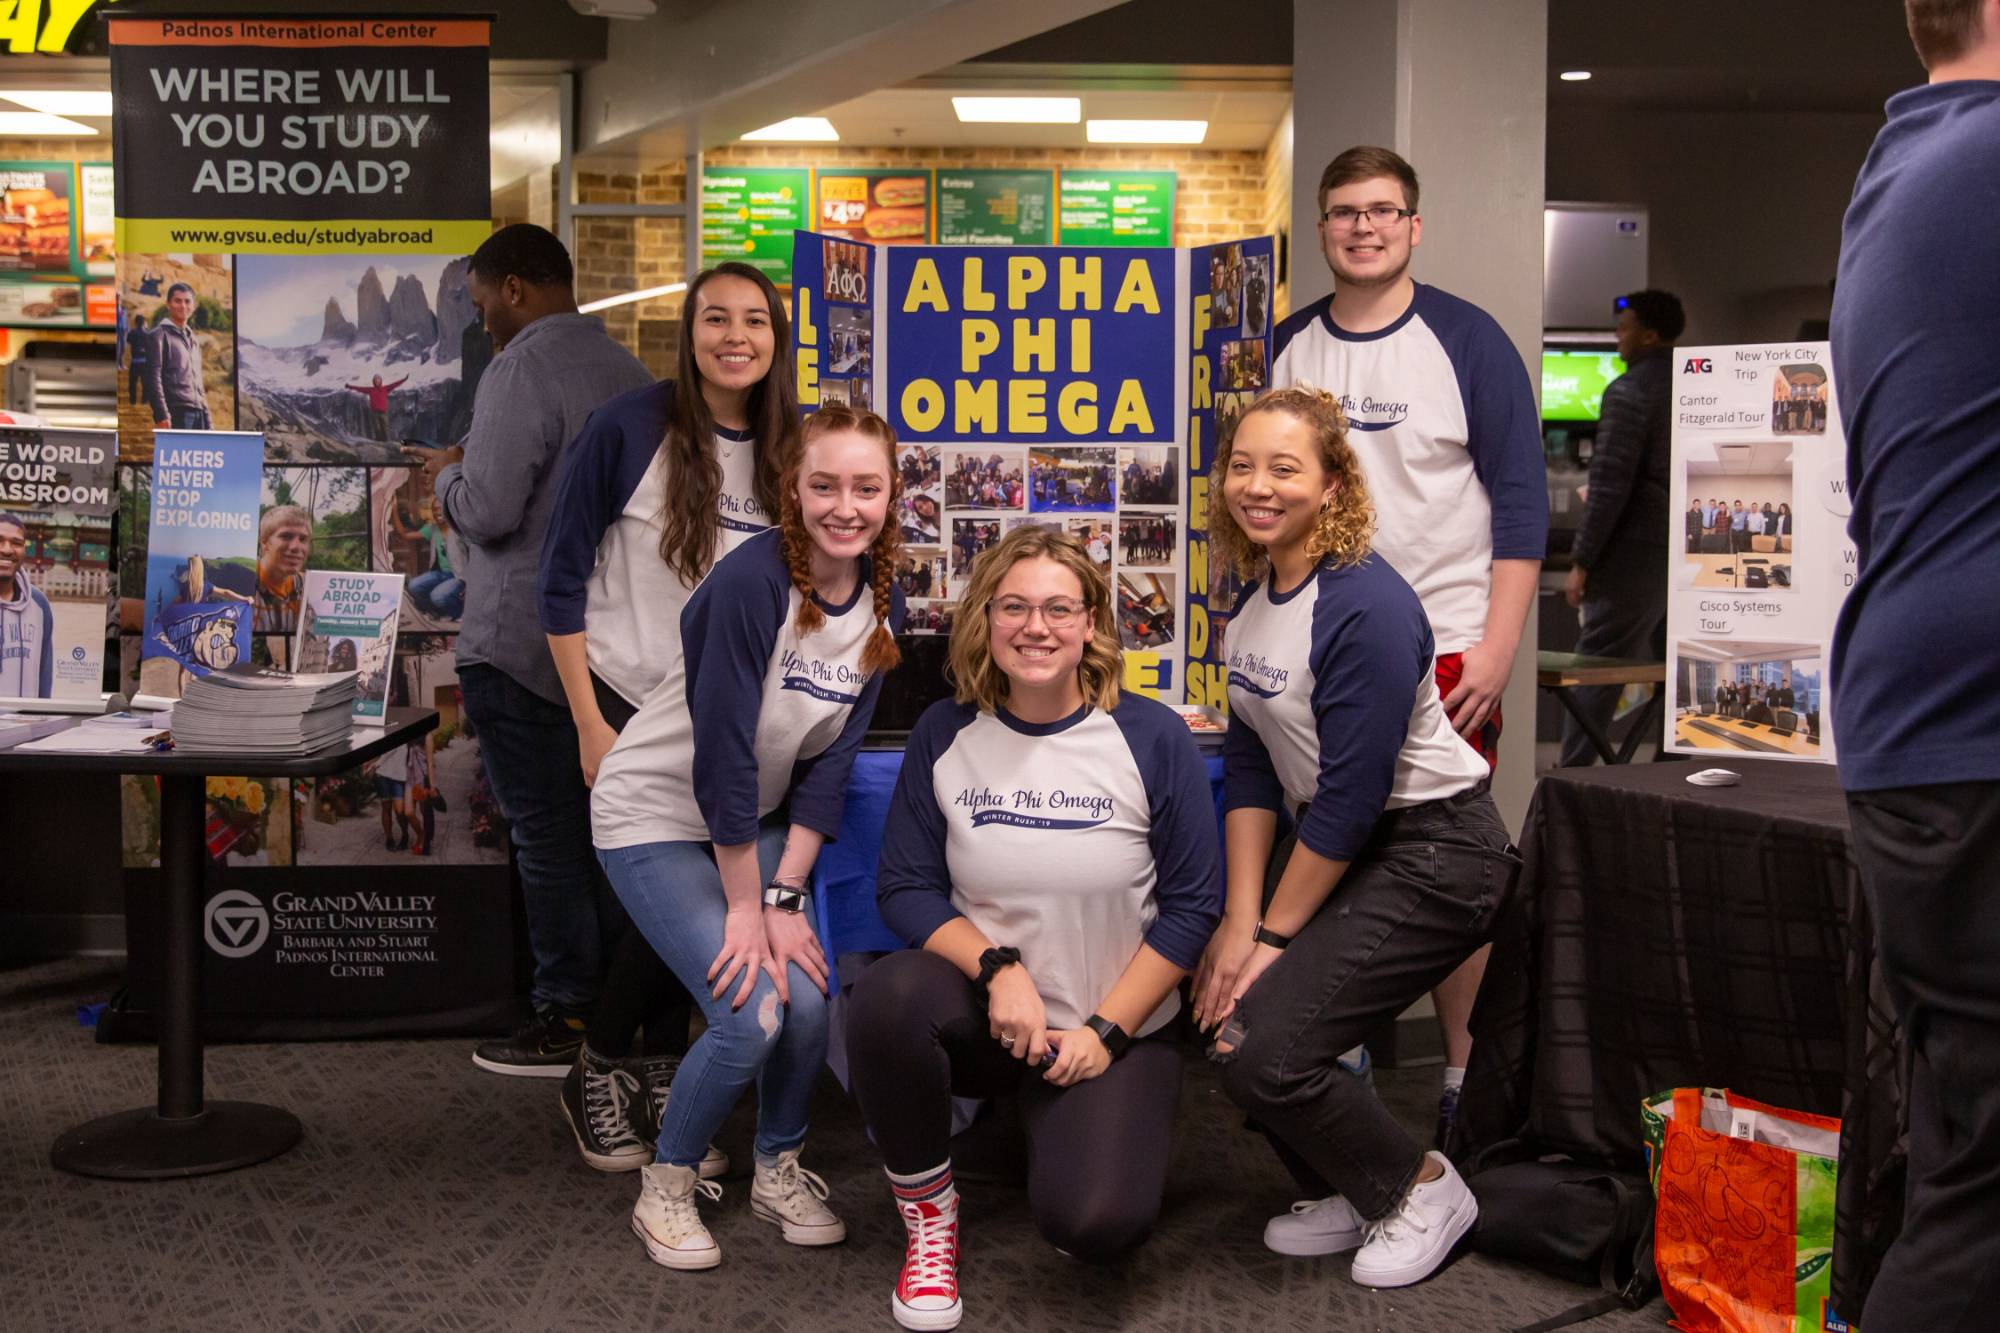 Students in Alpha Phi Omega standing in front of their sign